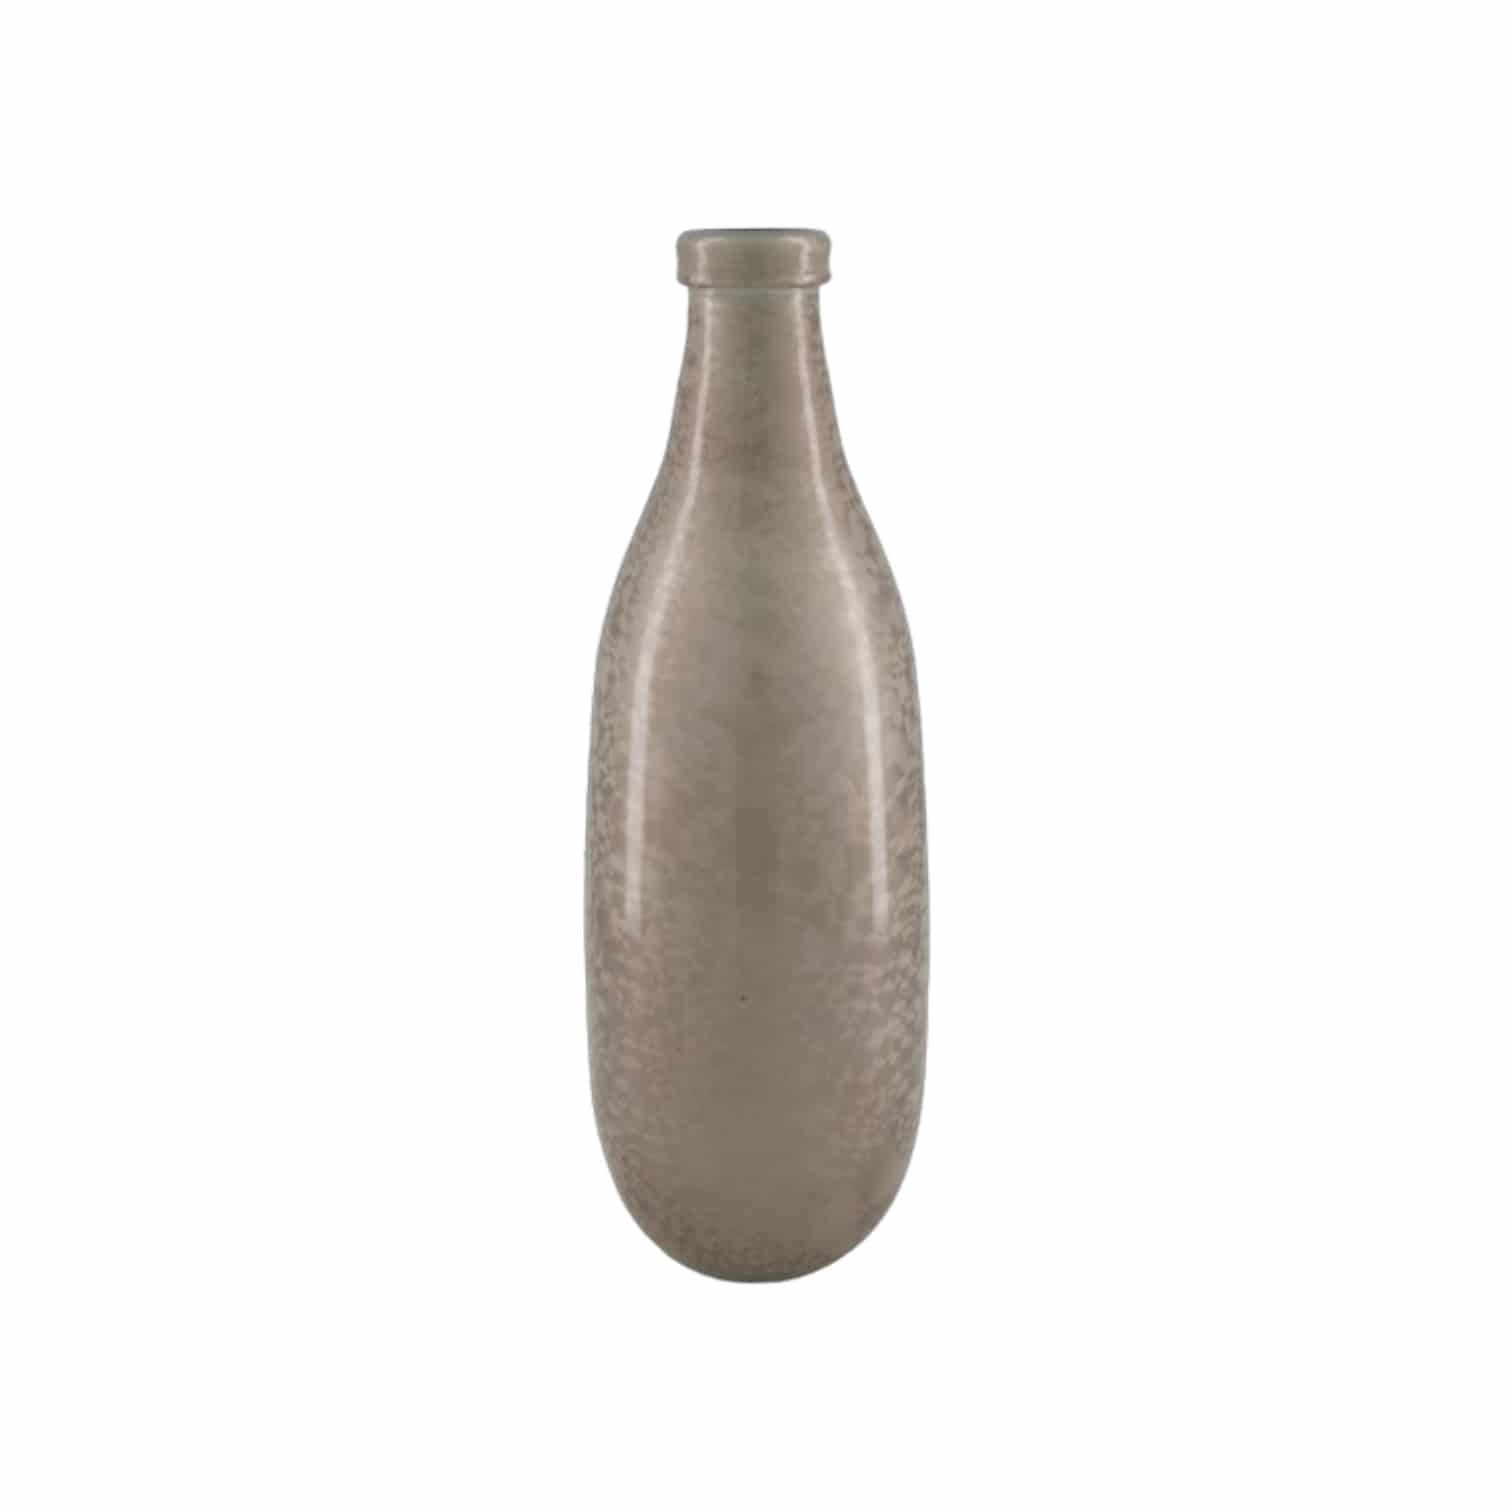 Flasche Glas beige "recycled glass"